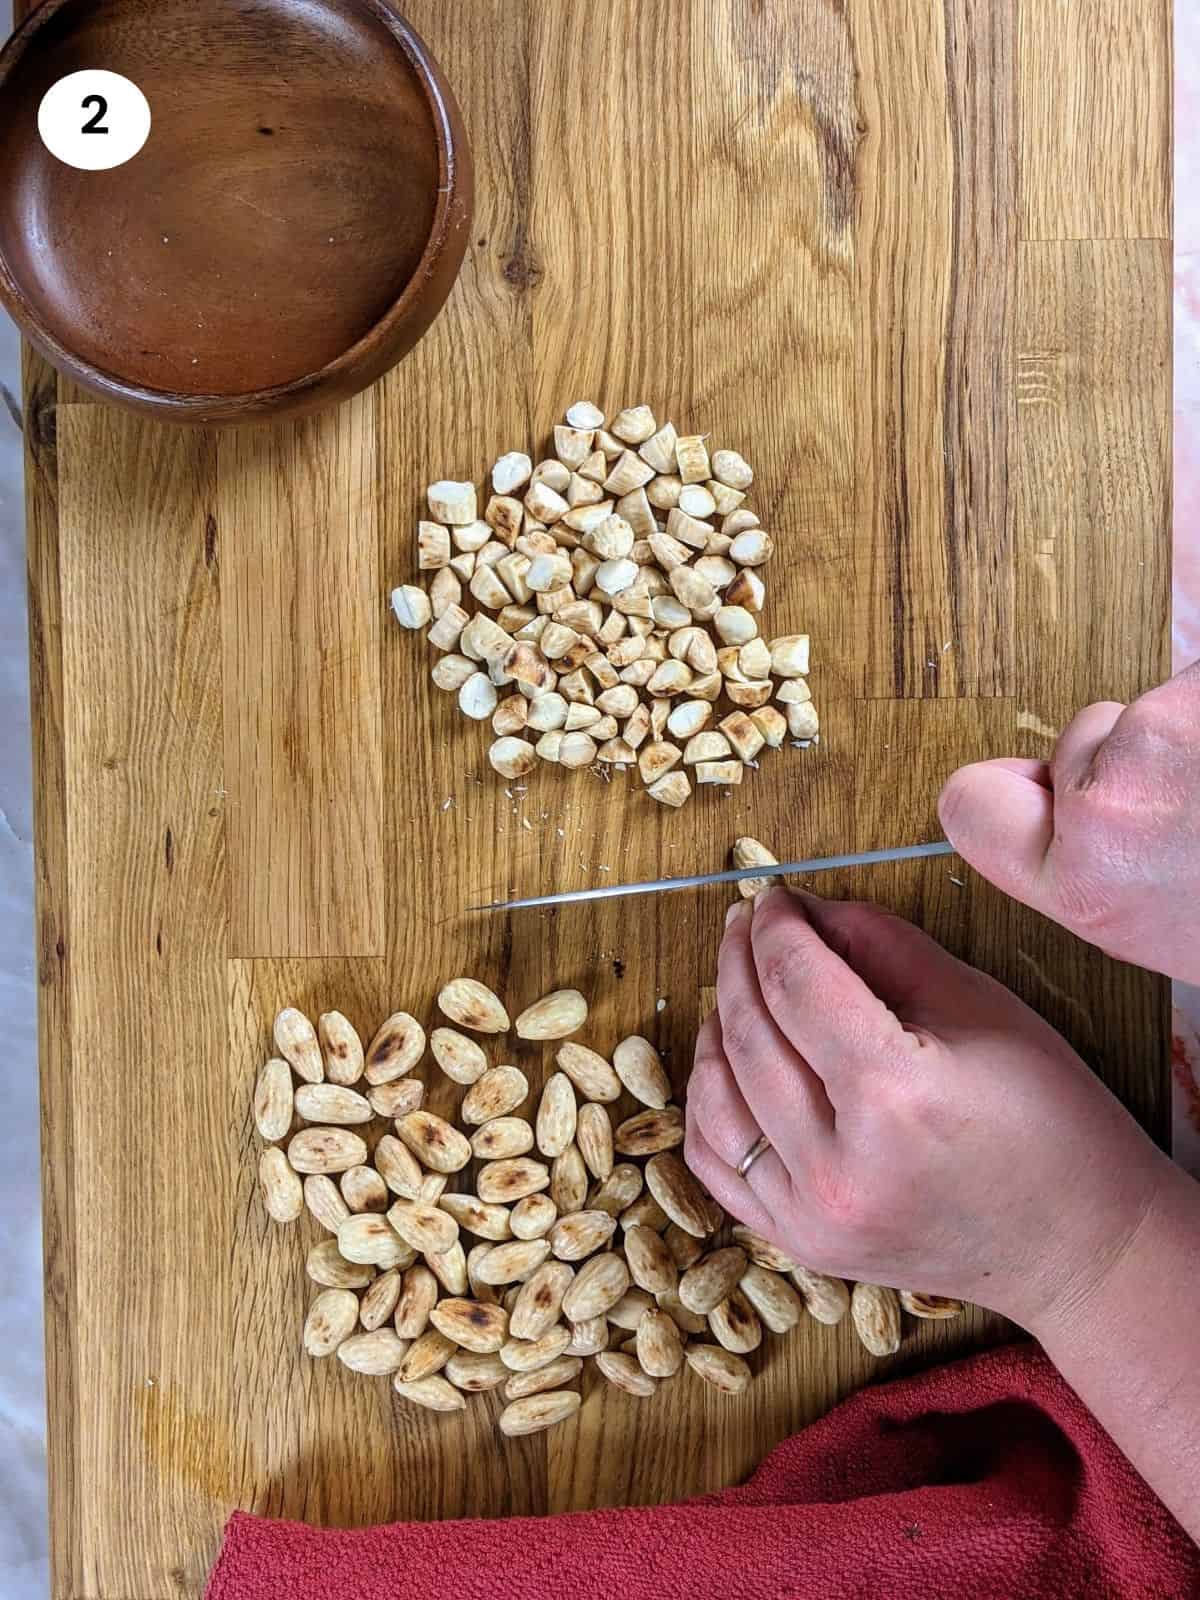 Cutting the almonds into smaller chunks.